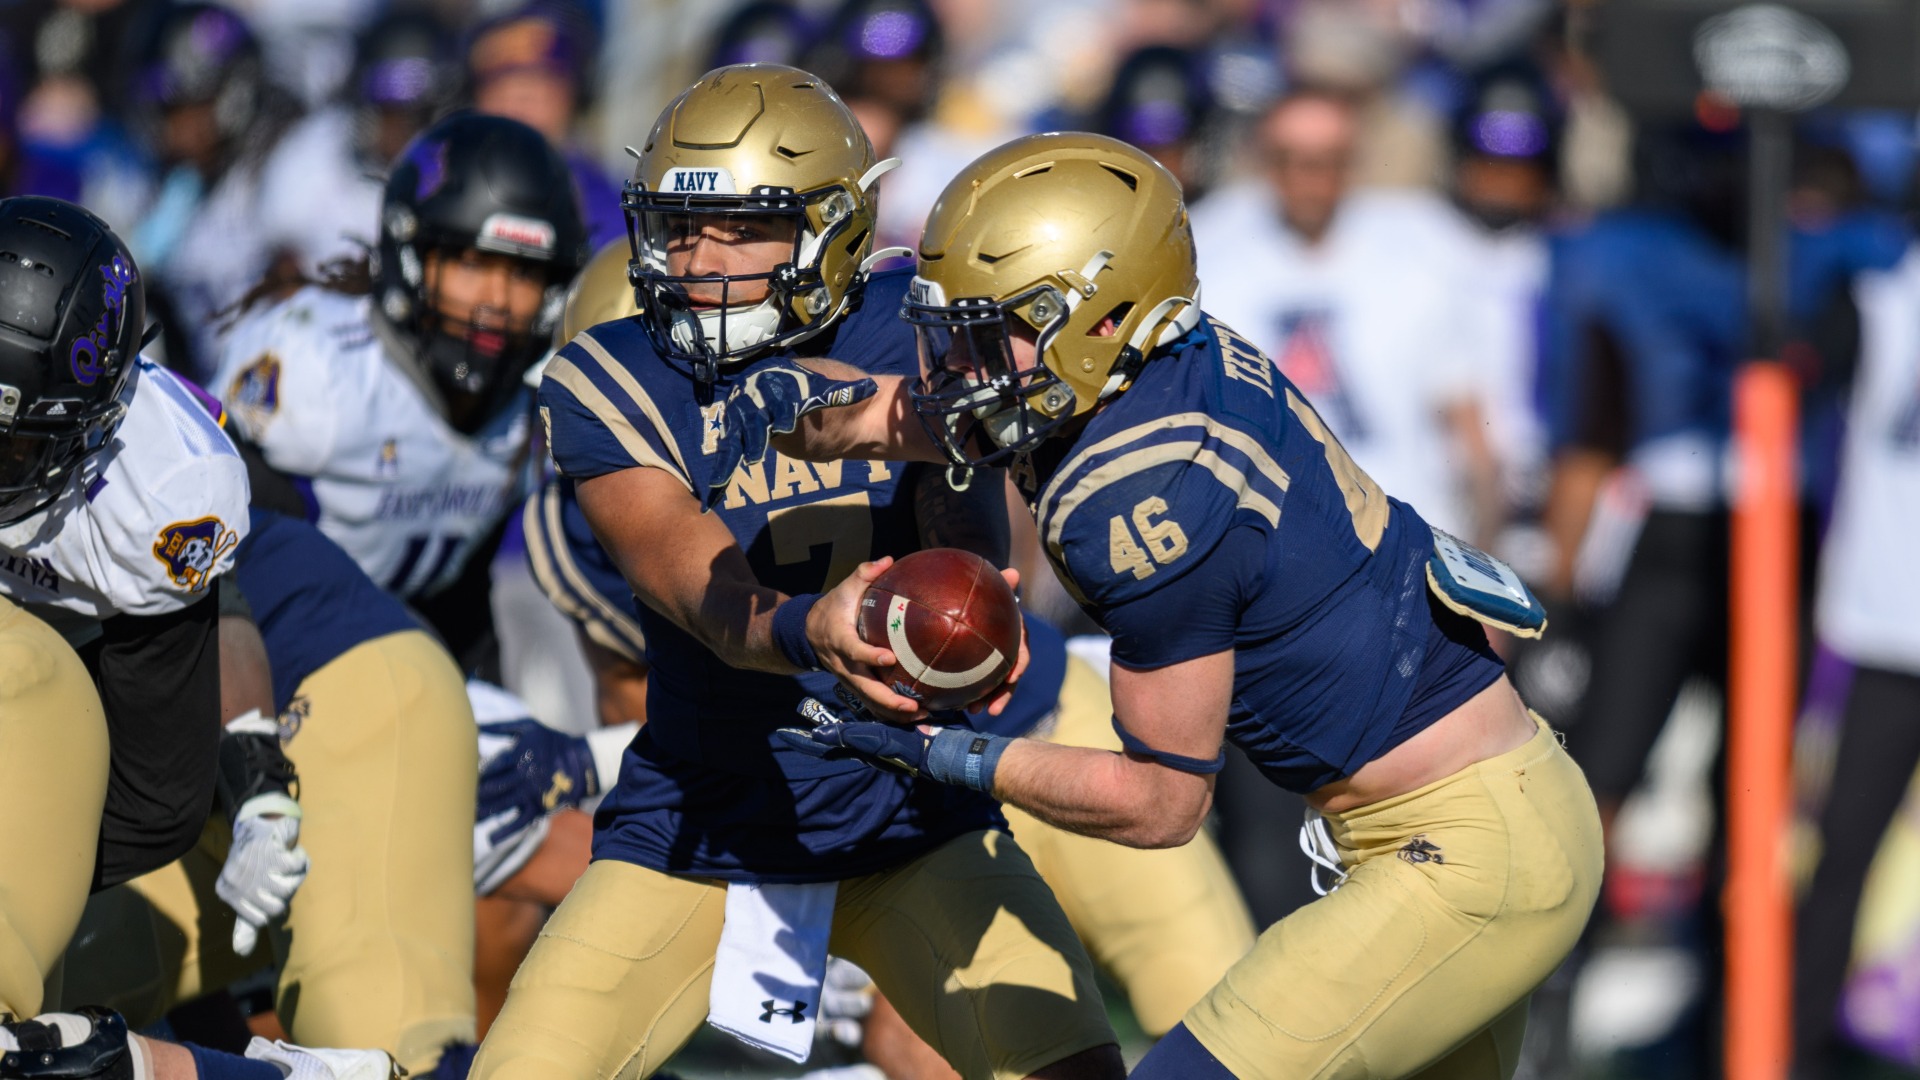 Army-Navy Preview: Can Navy Re-Assert Dominance Over Rival?